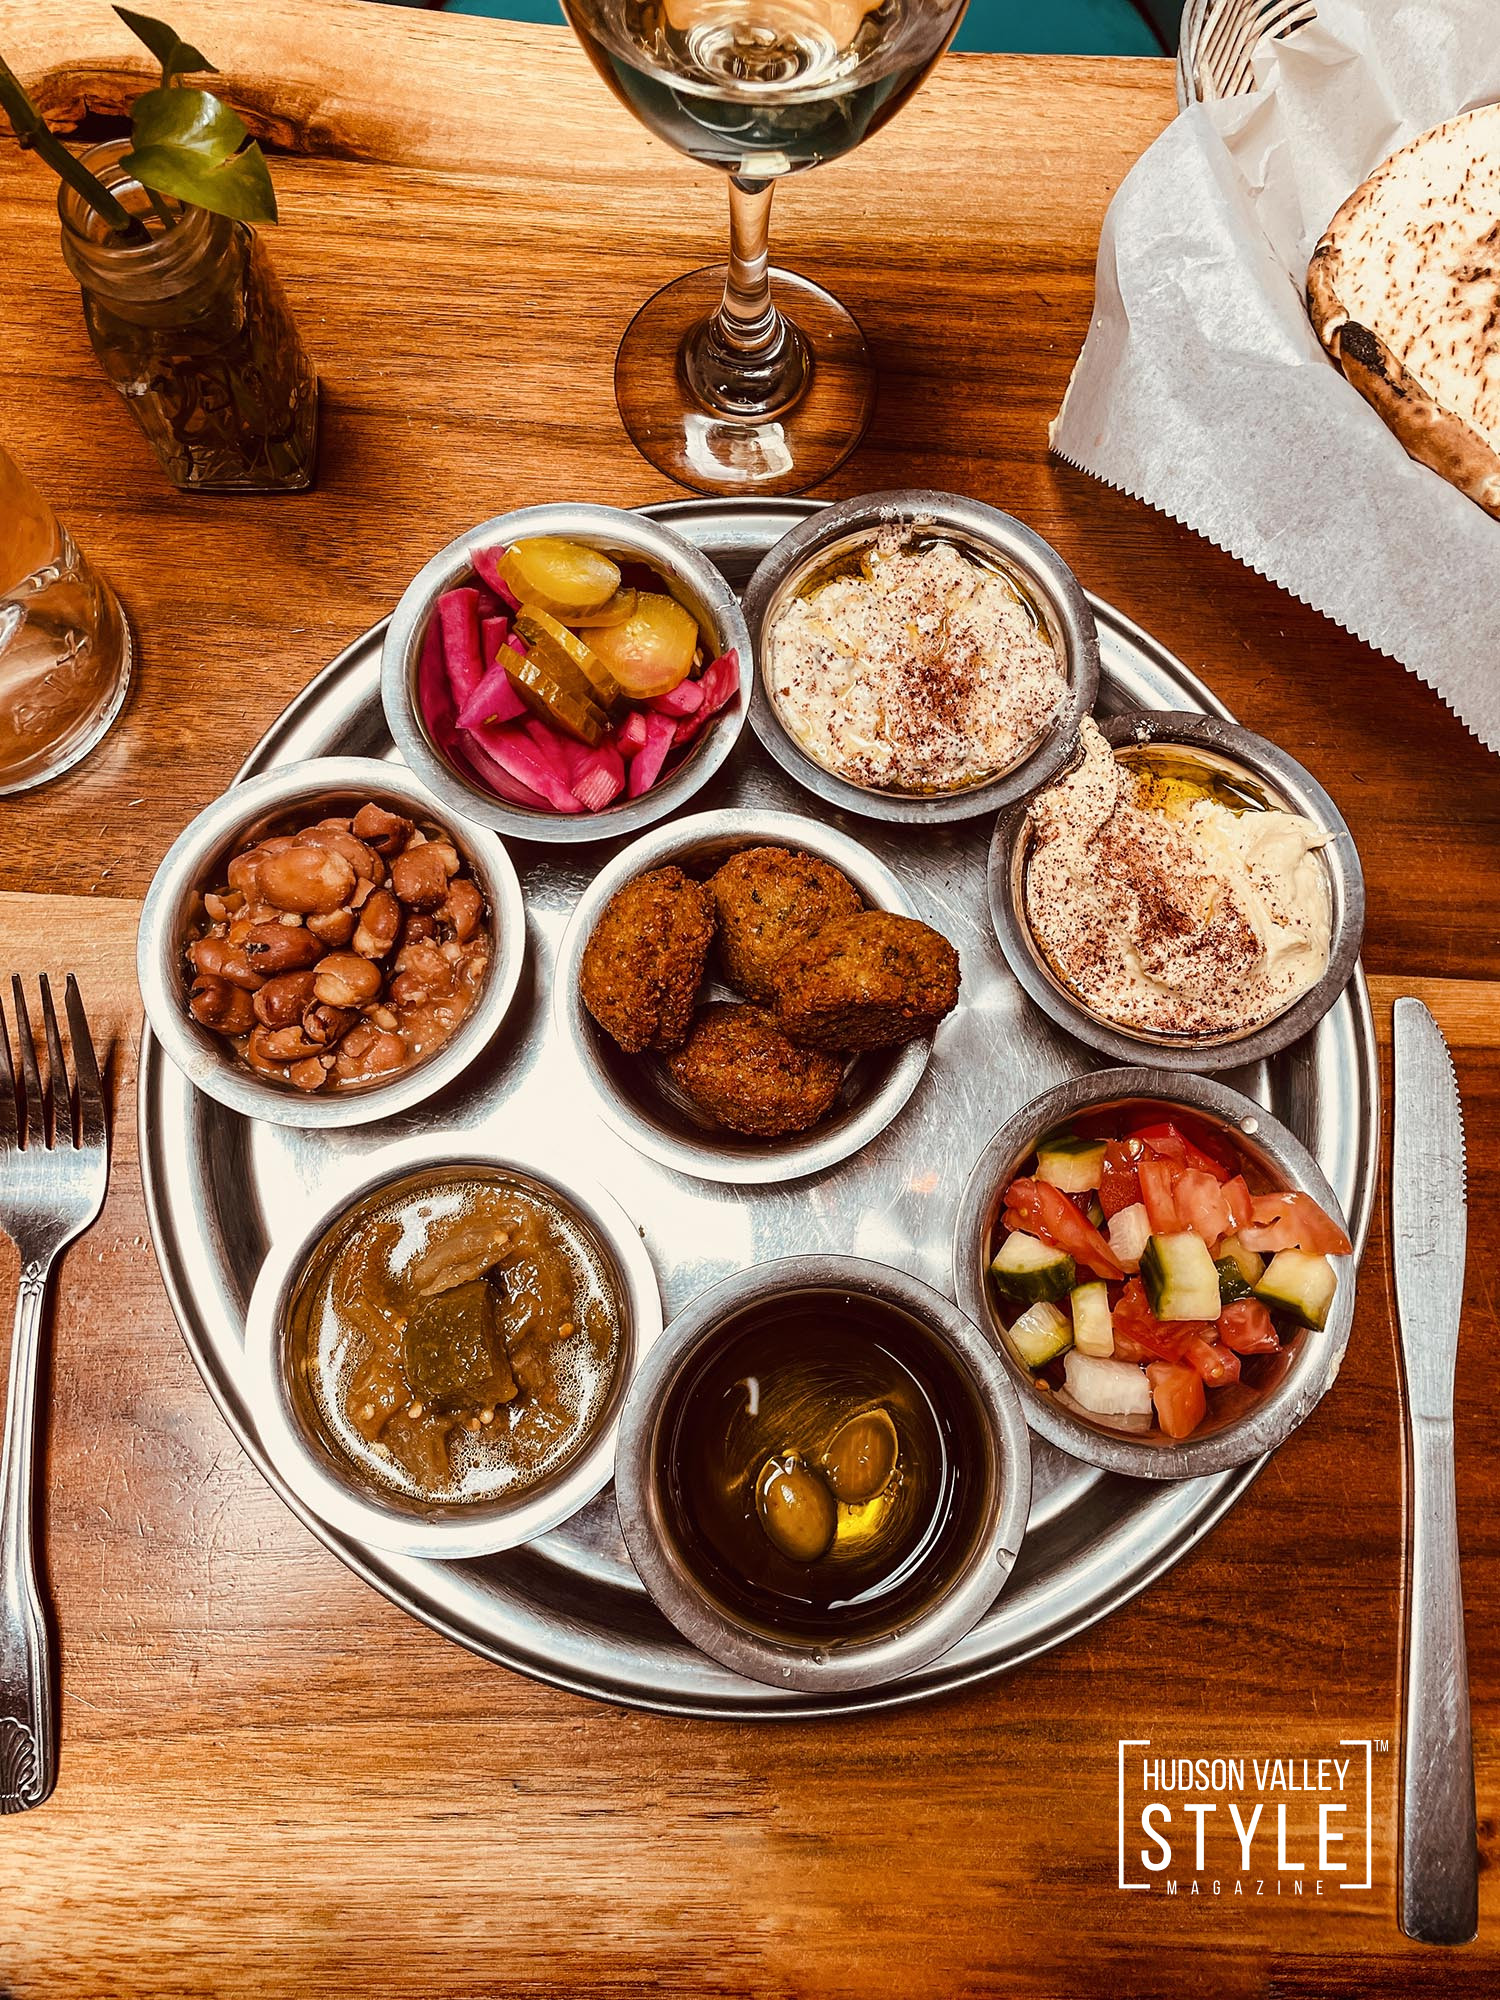 A Taste of the Middle East at Ziatun Restaurant: Discover the Best Palestinian Cuisine in Beacon, NY – Restaurant Reviews with Photographer Maxwell Alexander – Presented by Alluvion Vacations